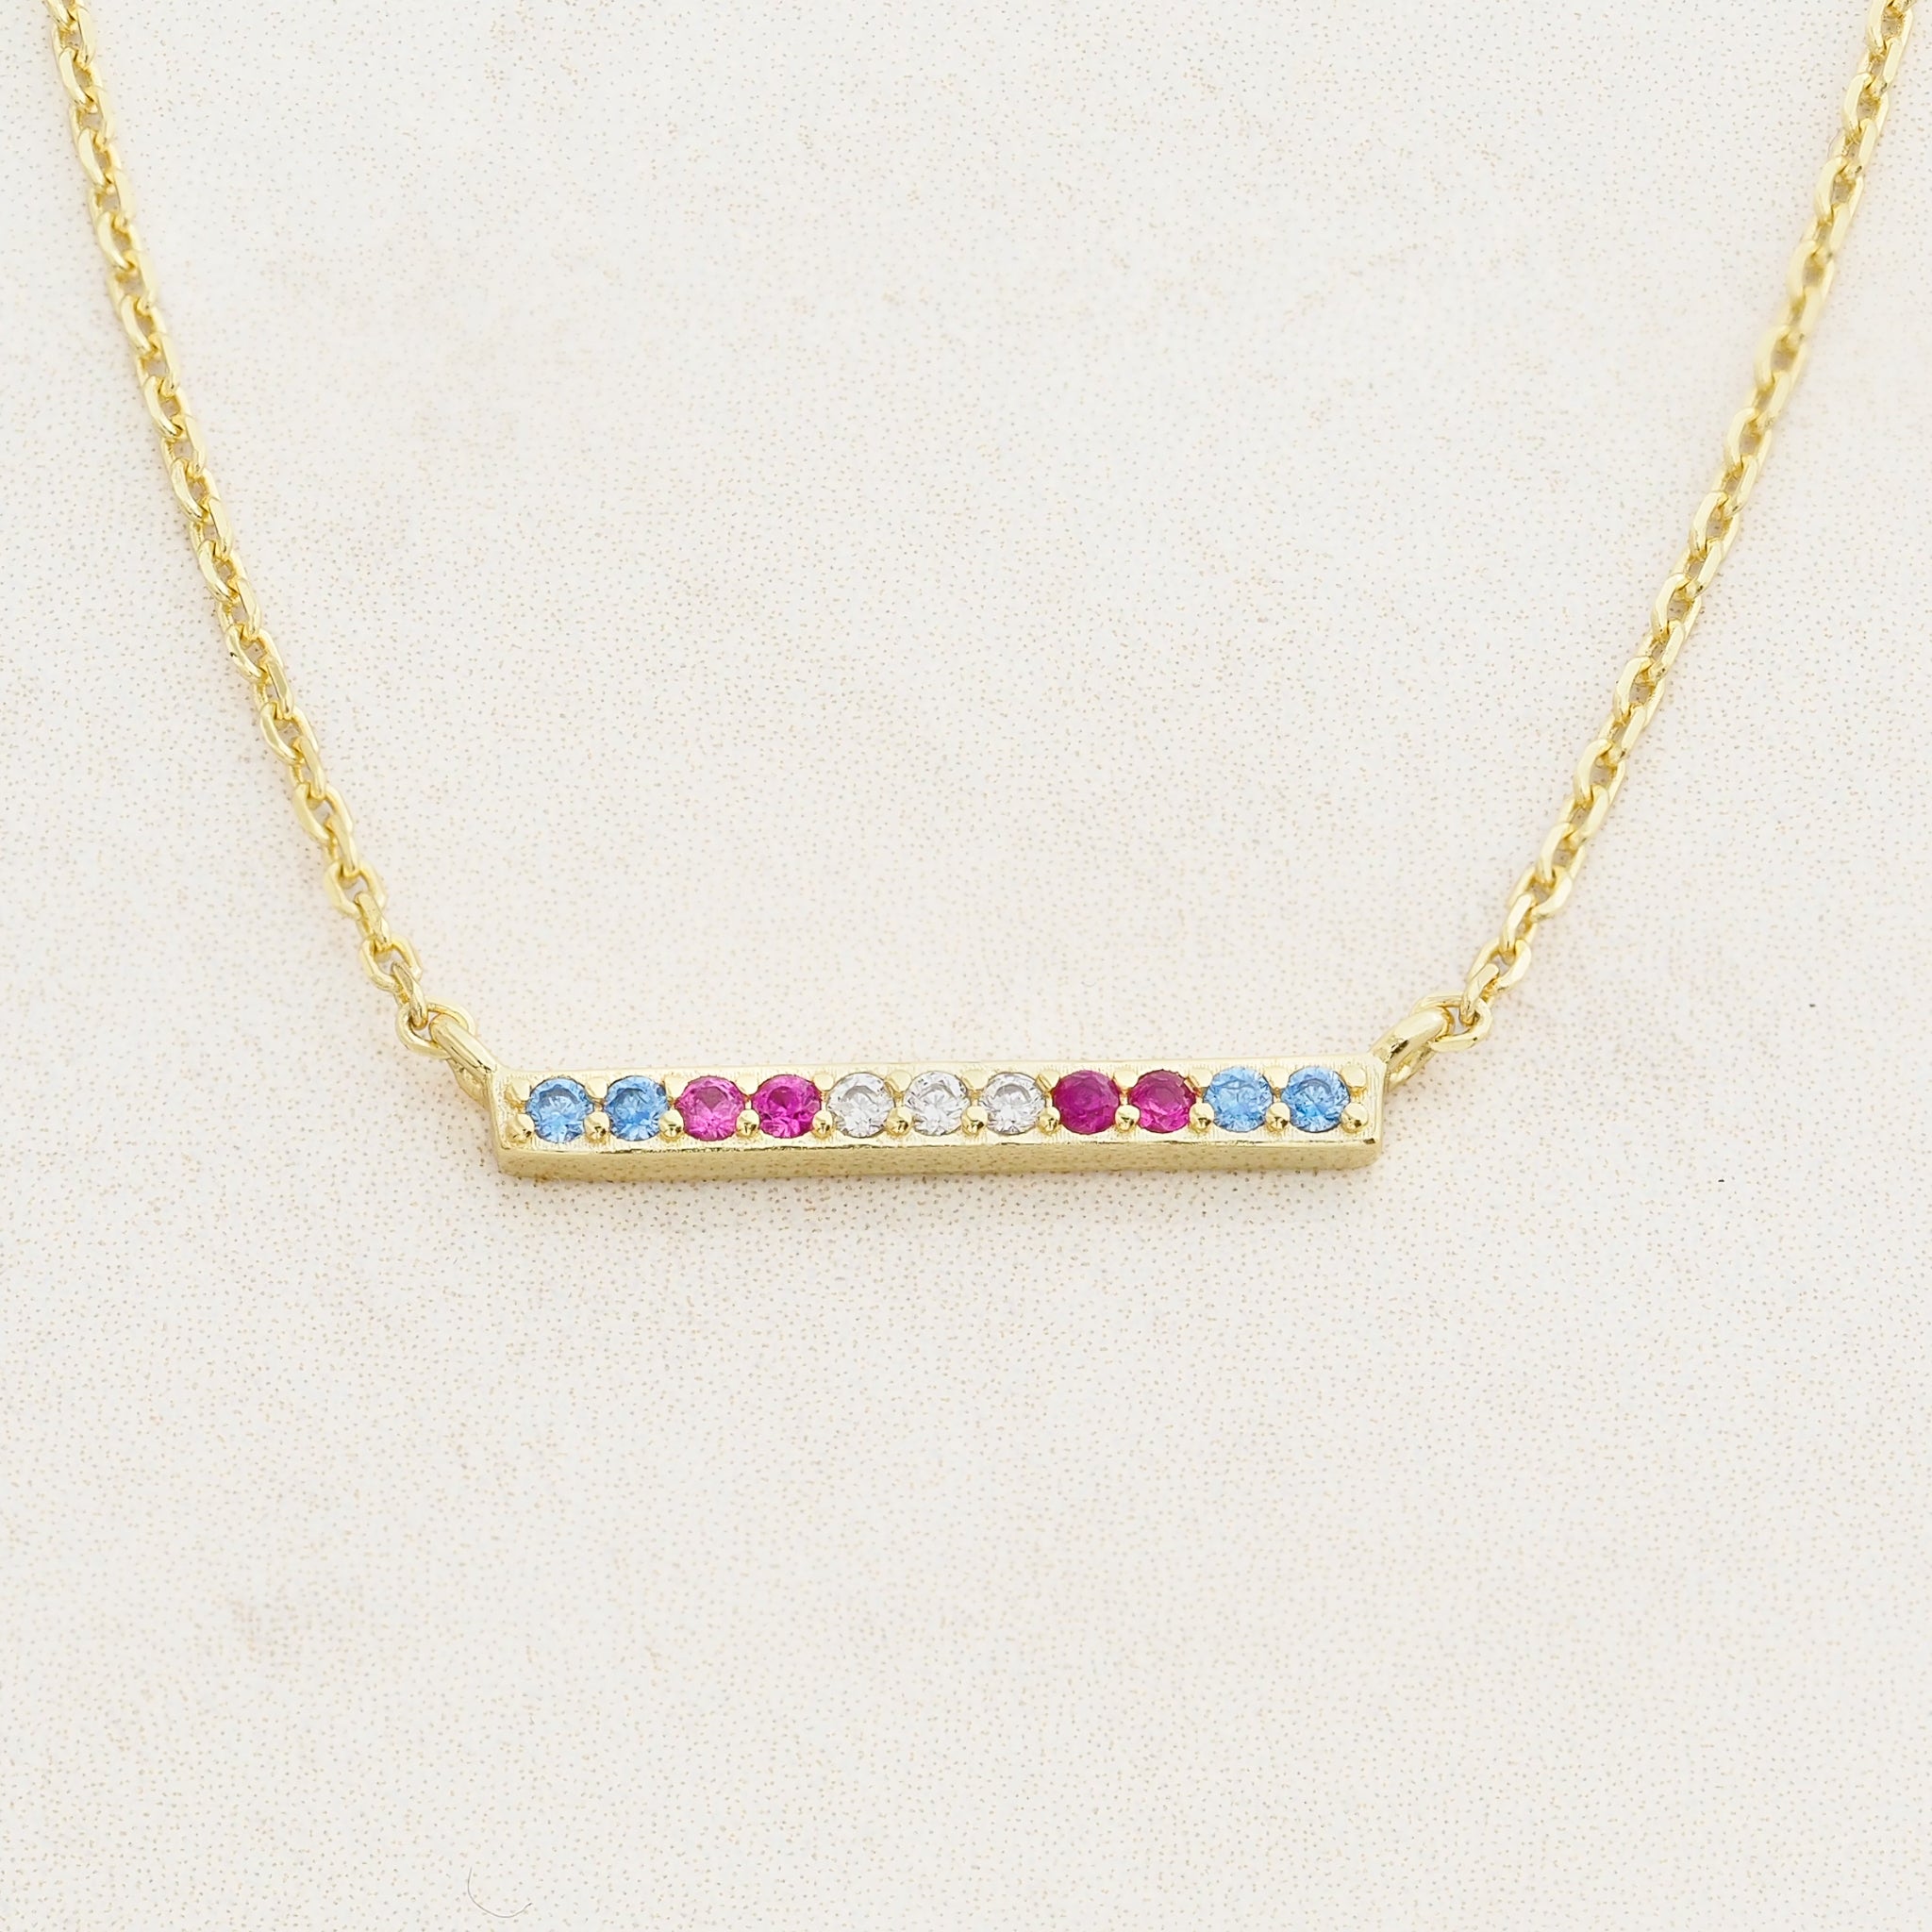 Transgender necklace, pride jewelry, featuring colours from the transgender flag, straight on